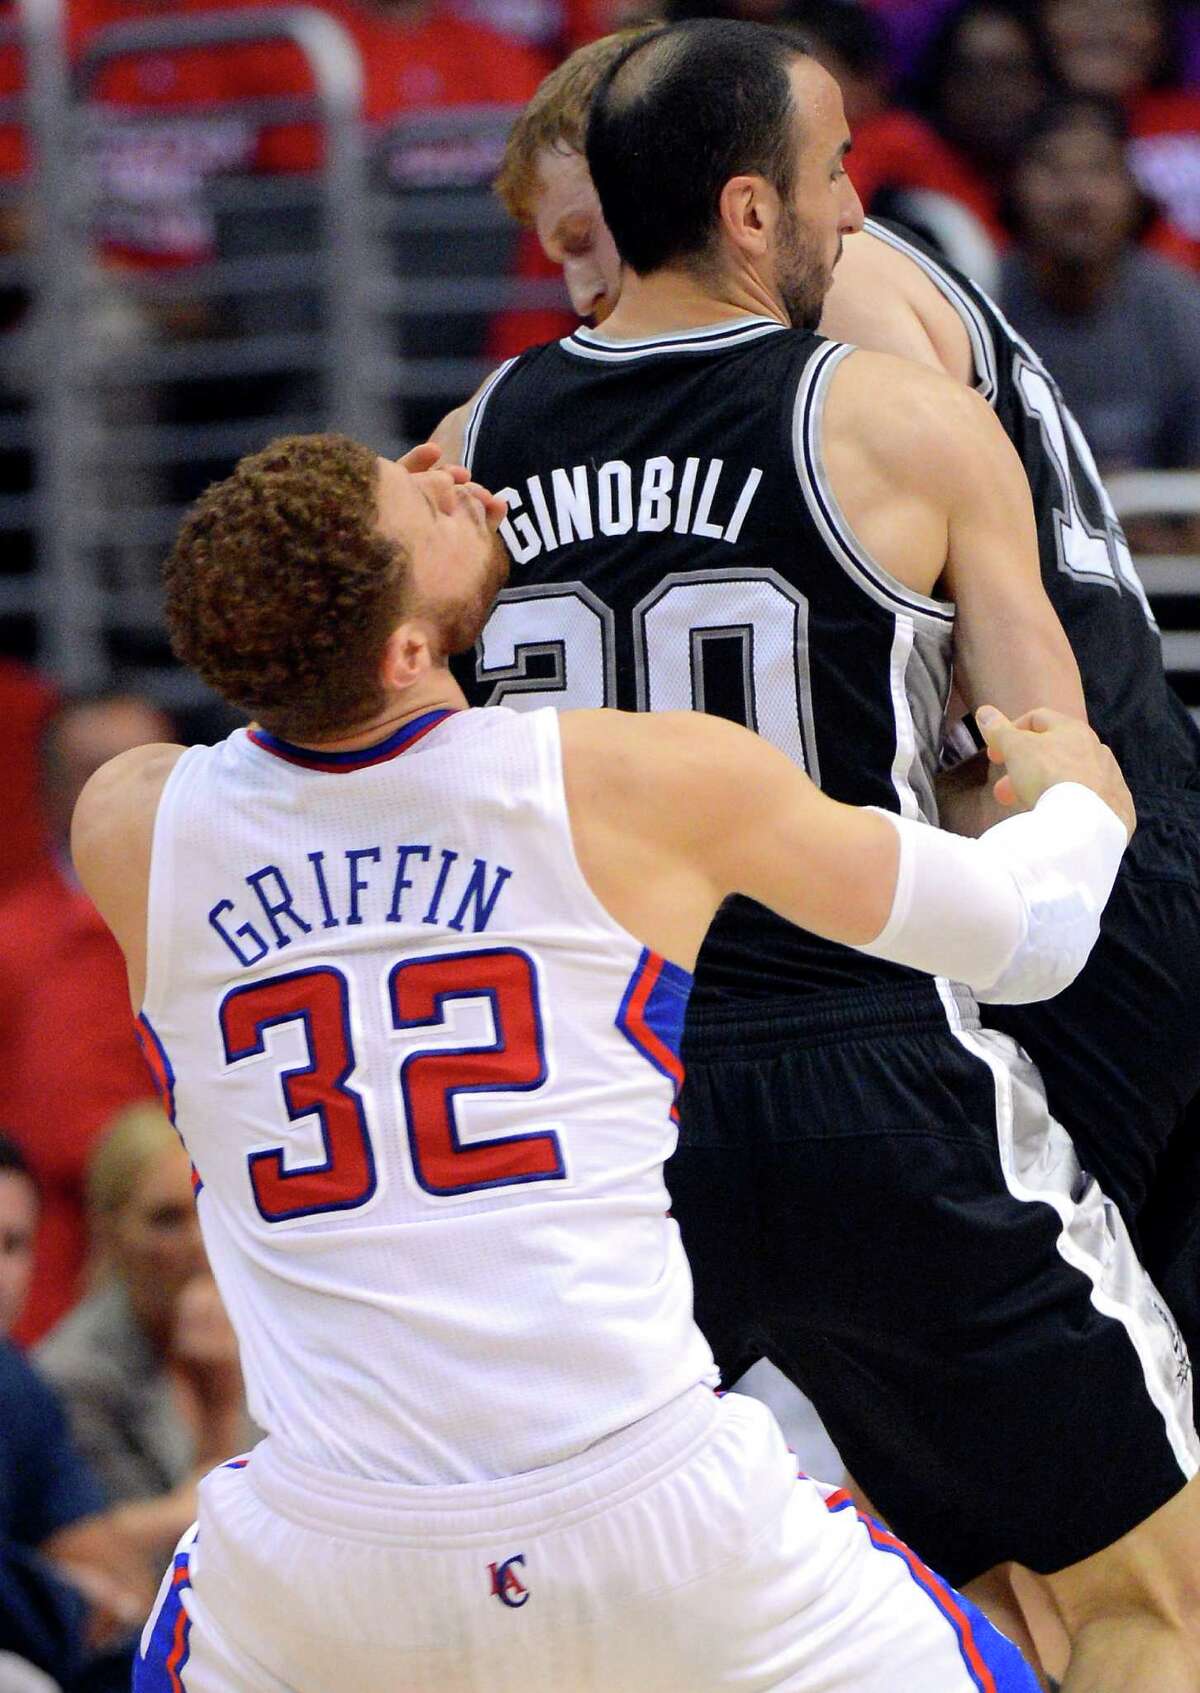 Los Angeles Clippers forward Blake Griffin, left, reacts after running into the back of San Antonio Spurs guard Manu Ginobili of Argentina during the first half in Game 4 of an NBA basketball playoffs Western Conference semifinal, Sunday, May 20, 2012, in Los Angeles. (AP Photo/Mark J. Terrill)